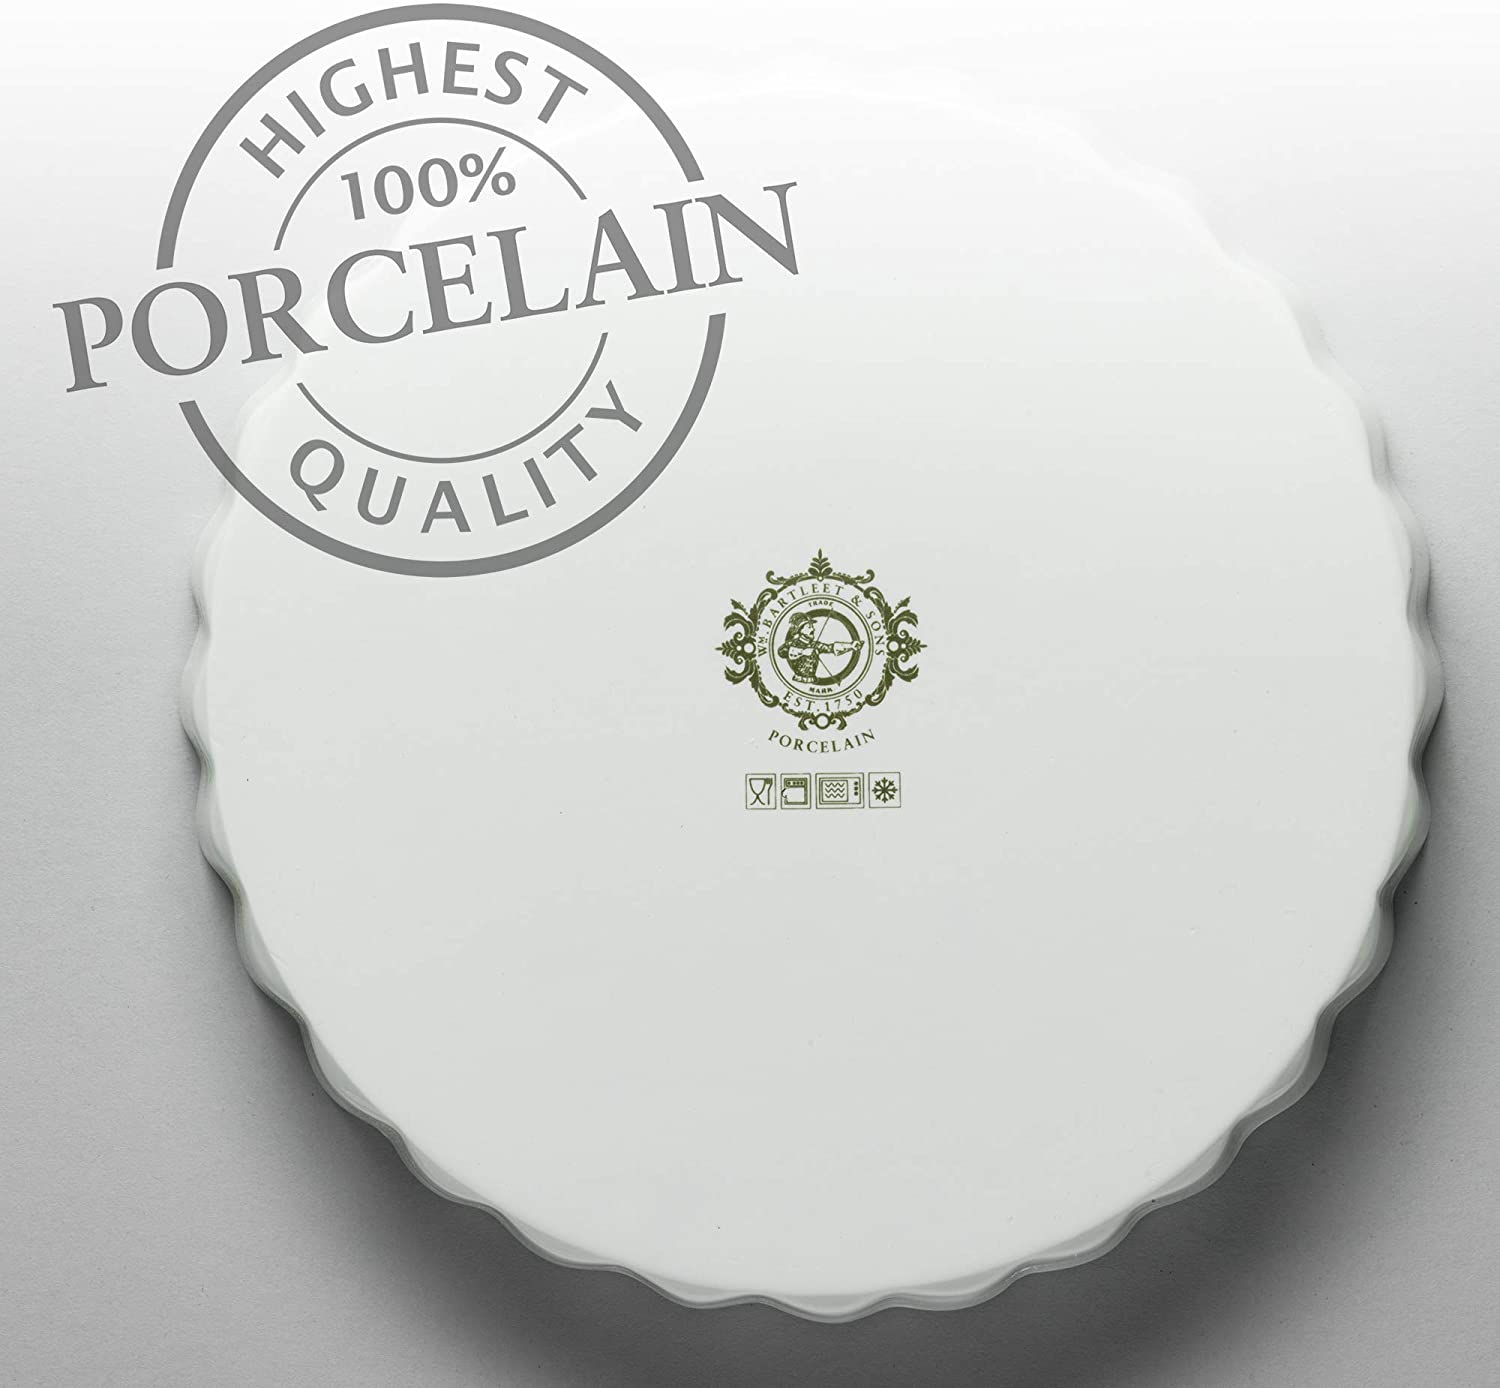 the 100% porcelain stamp at the base of the dish